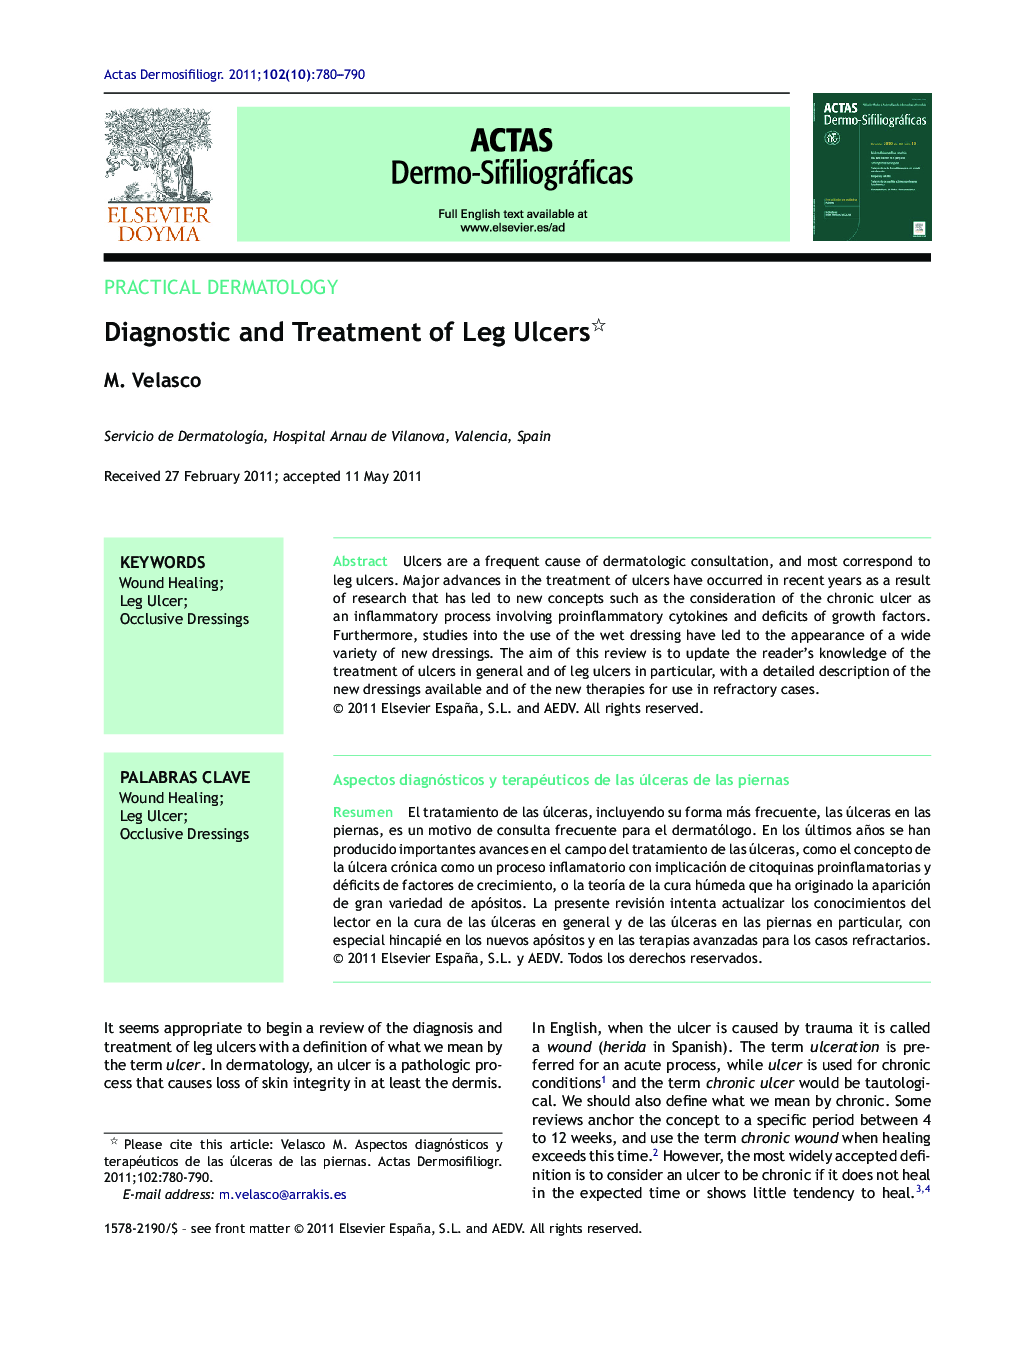 Diagnostic and Treatment of Leg Ulcers 